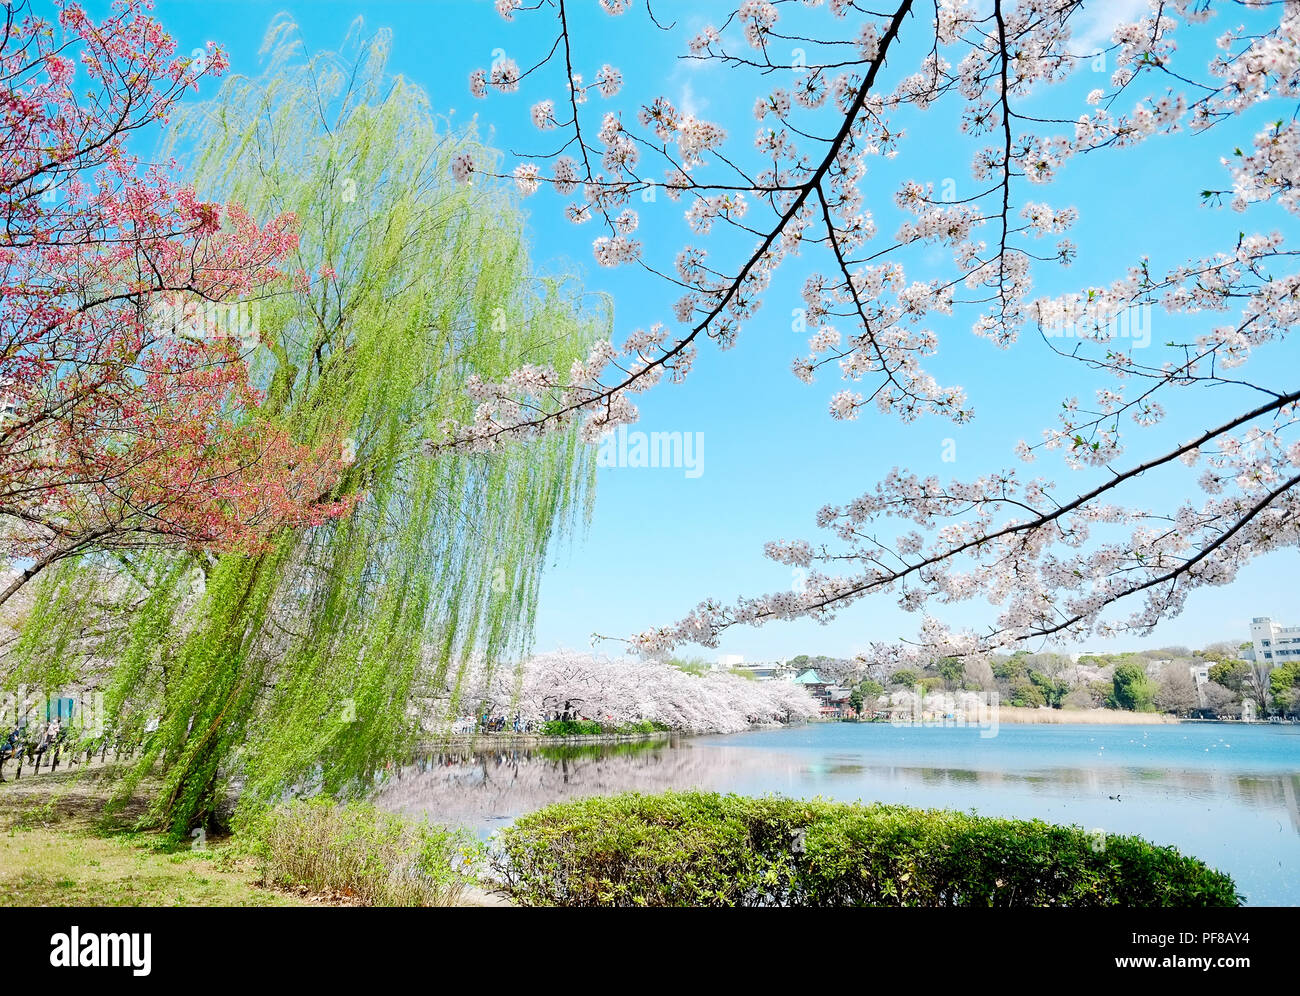 Beautiful scenery with red leaf, green willow, blossom sakura, clear pond and bright vivid blue sky in spring cherry blossom season, Tokyo, Japan Stock Photo